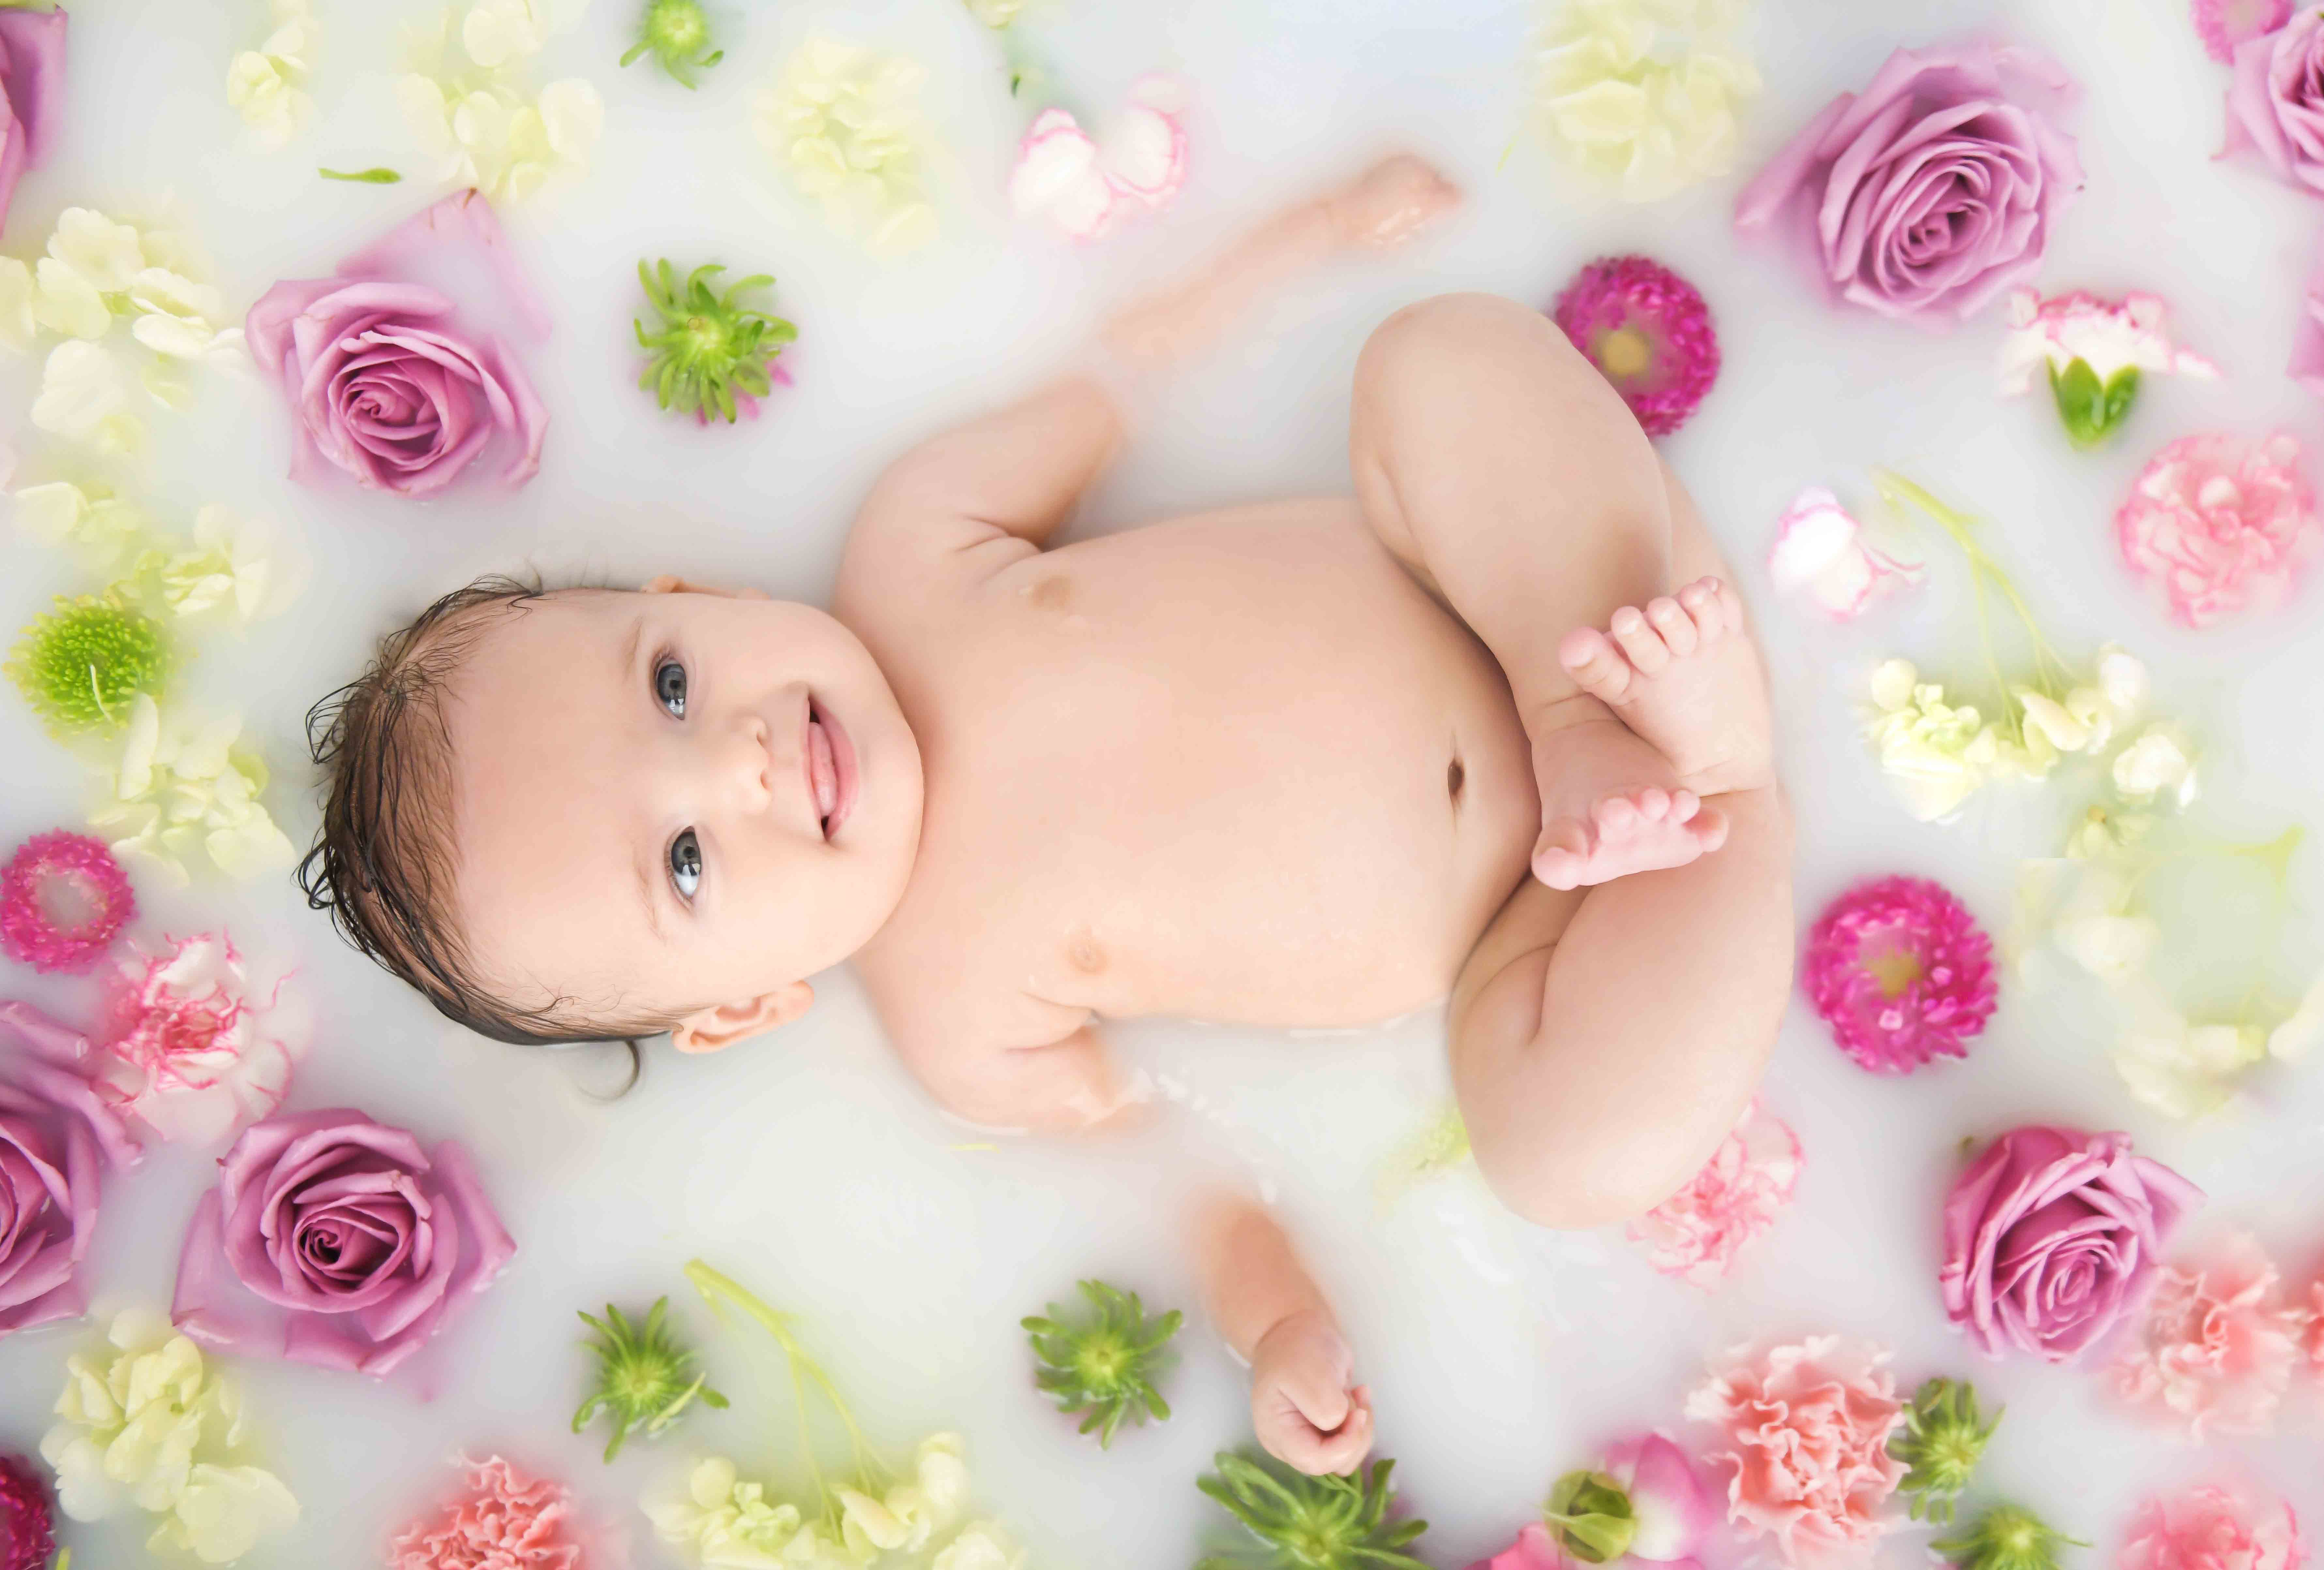 How To Make Baby Milk Bath / baby milk bath photoshoot | Baby milk bath, Baby milk ... / After adding more water, add milk, because adding water to the milk can produce a bubbly look.